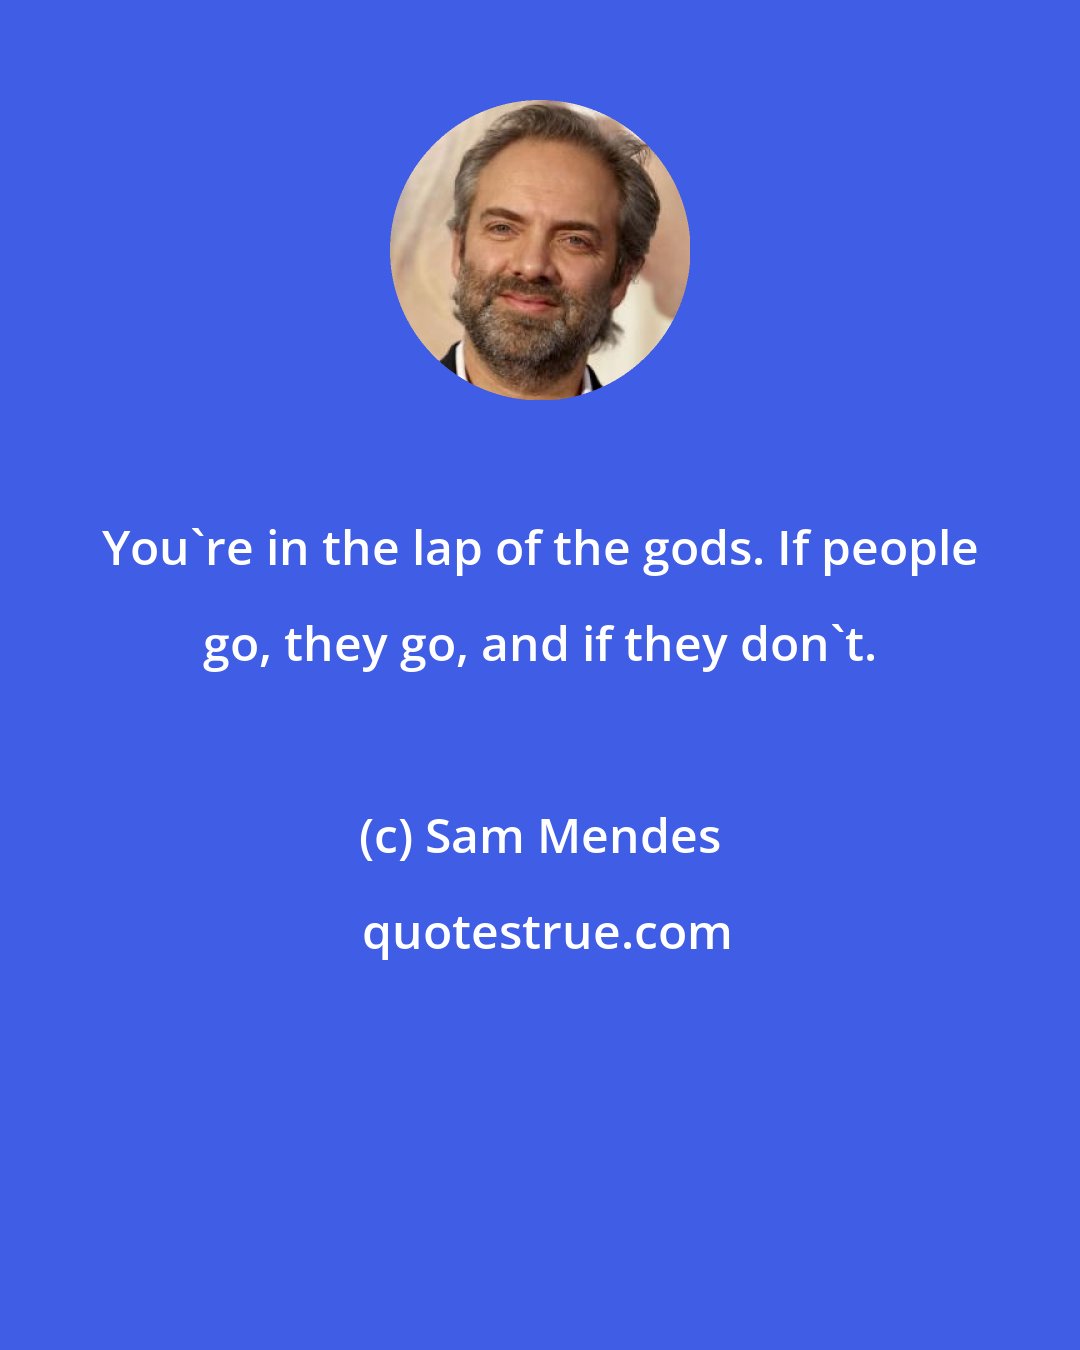 Sam Mendes: You're in the lap of the gods. If people go, they go, and if they don't.